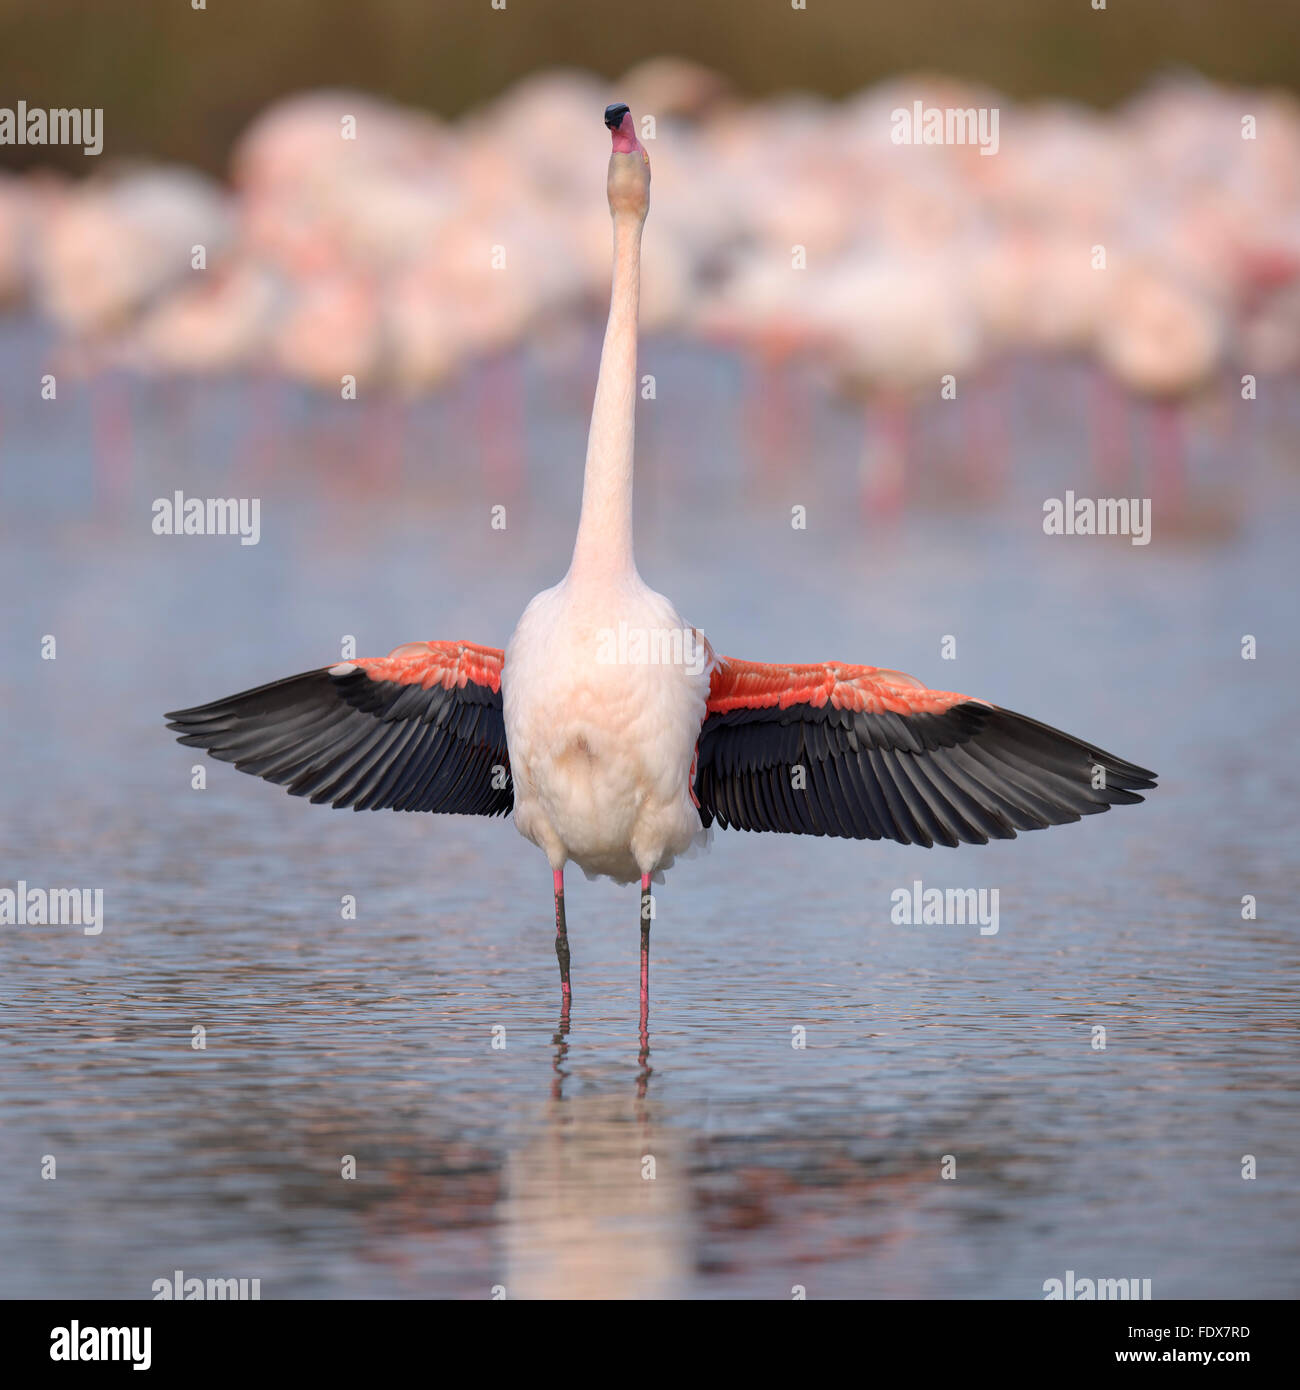 Greater flamingo (Phoenicopterus roseus), adult, courtship display, Camargue, Southern France, France Stock Photo